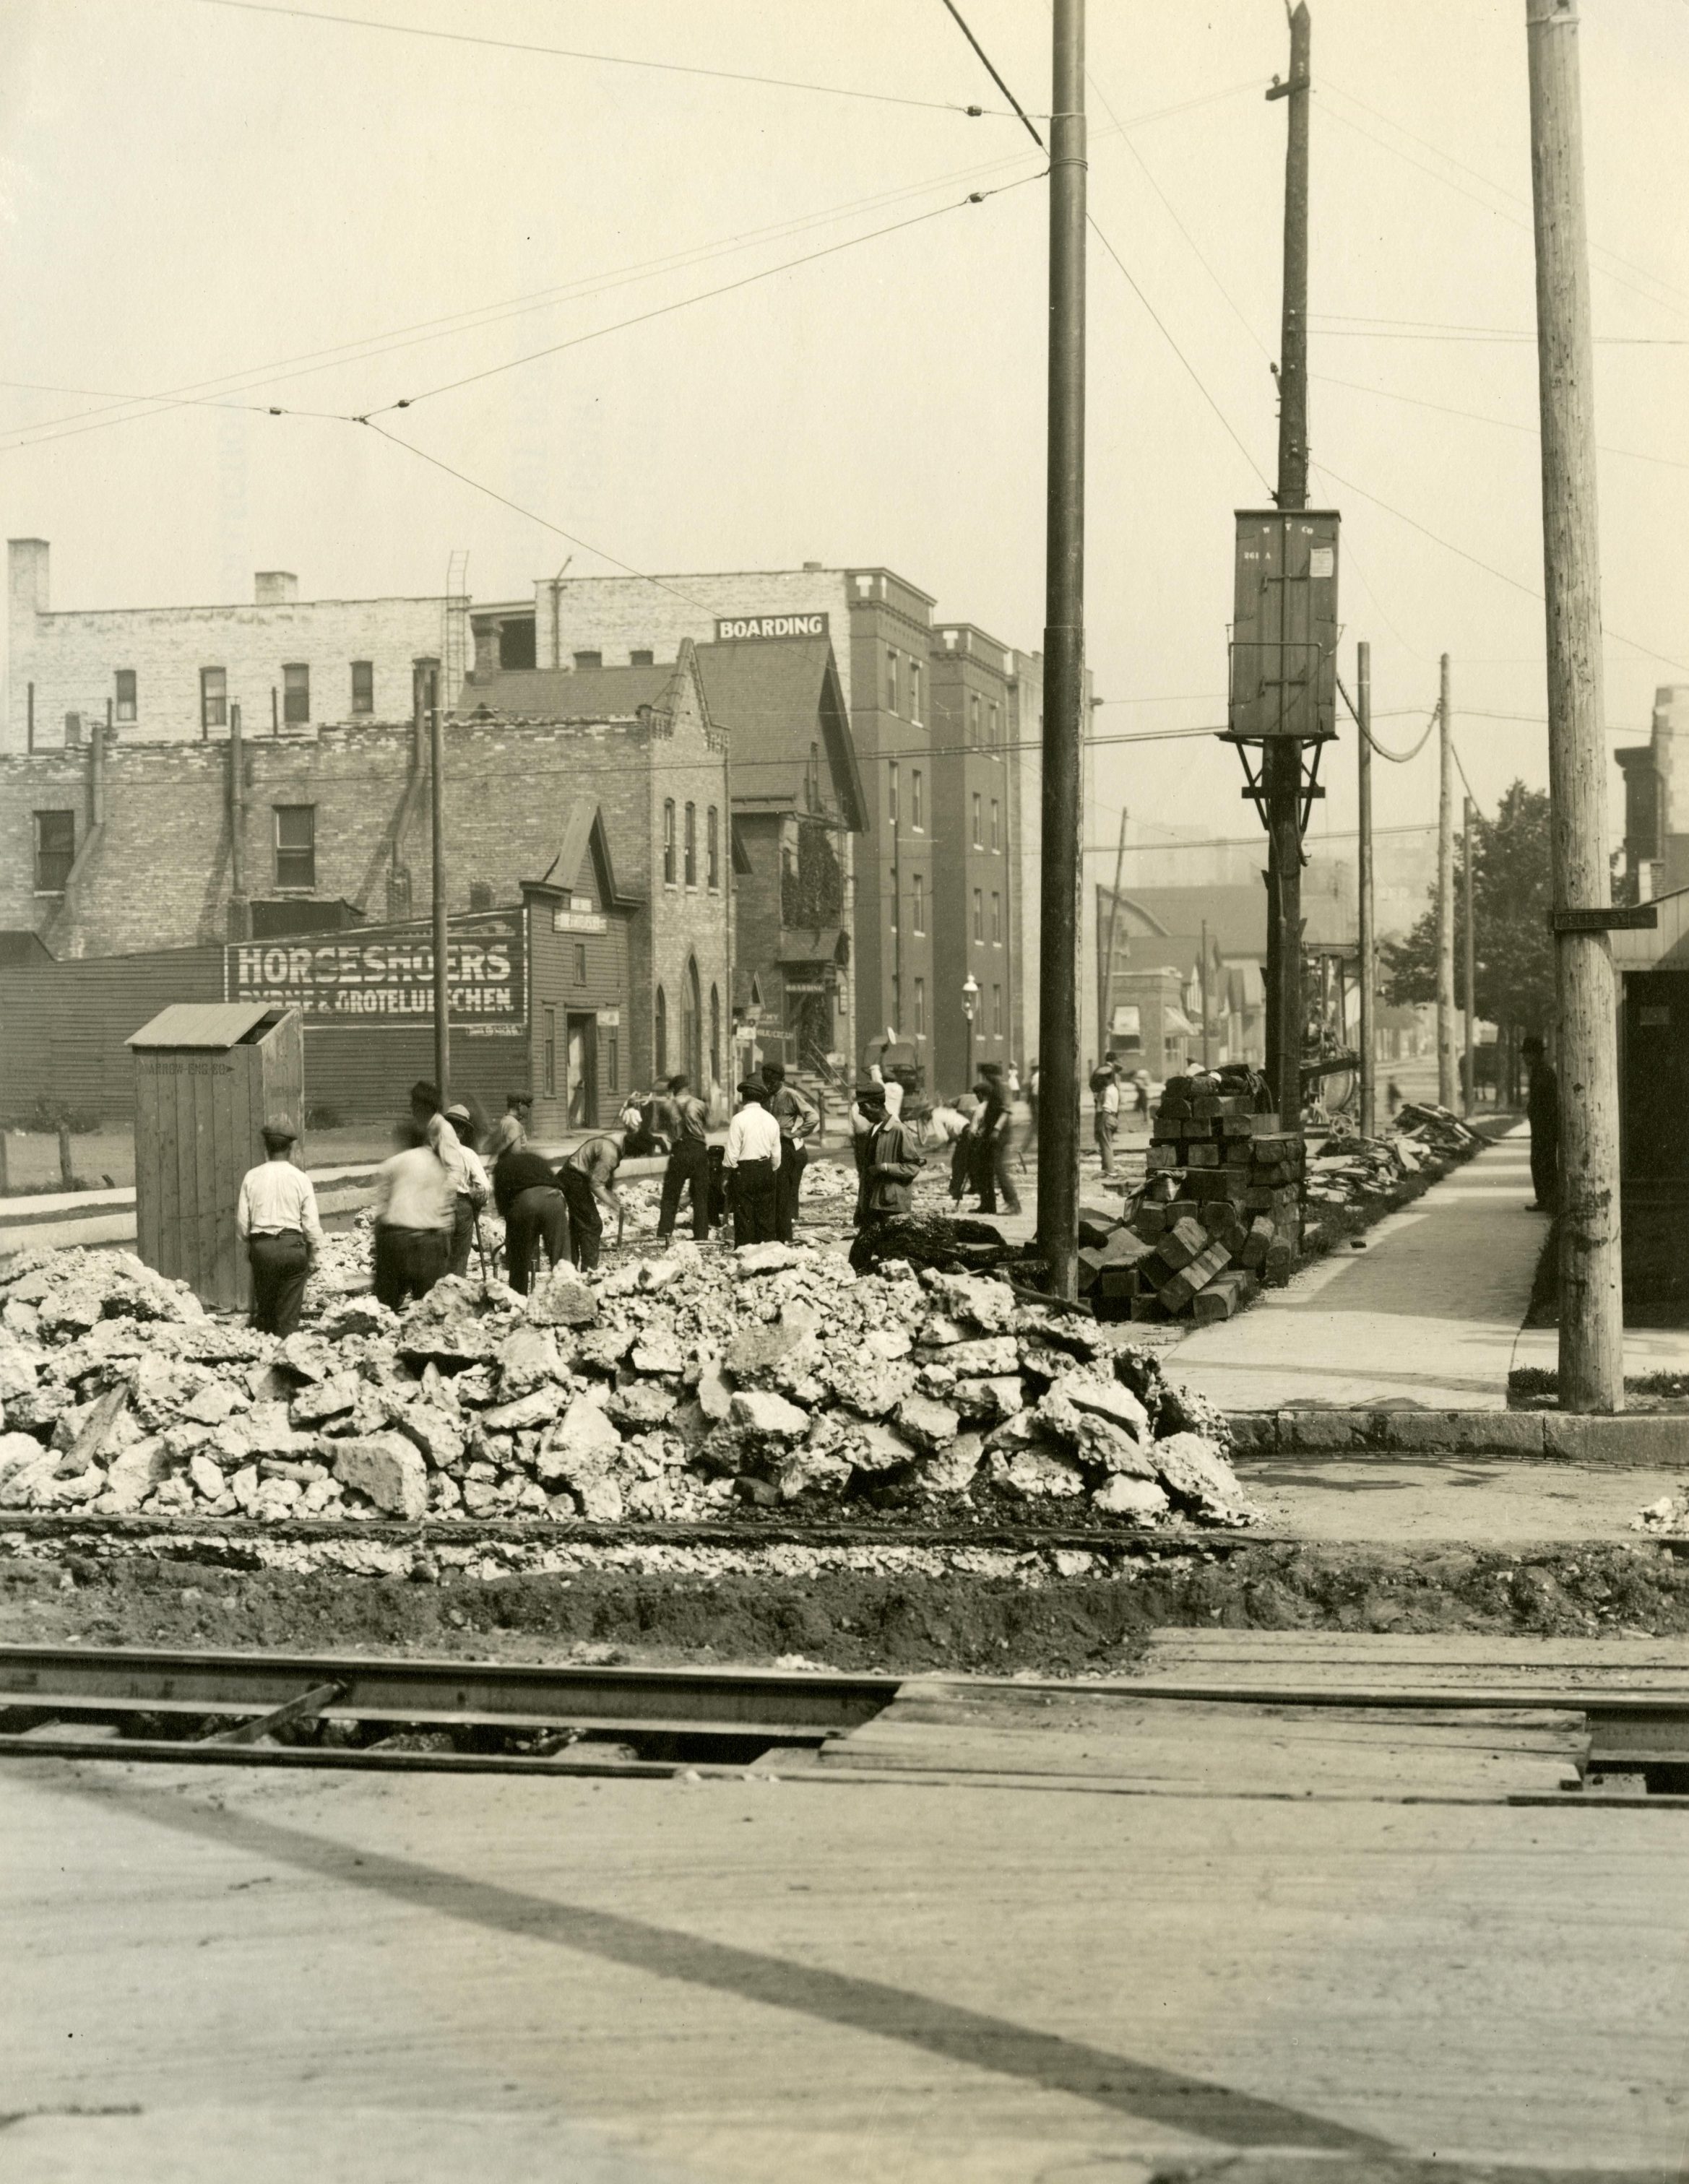 Men working on building the road at North 7th Street and West Wells in this 1913 photograph.